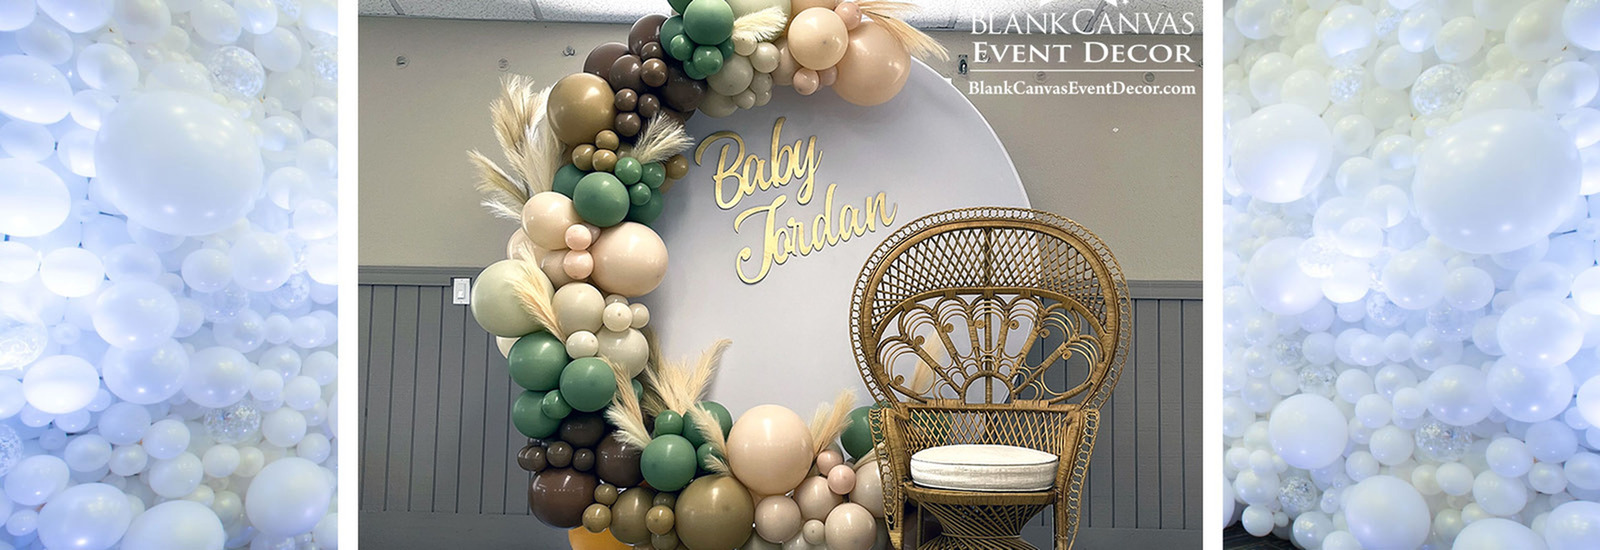  Boho Baby Shower backdrop with Organic Balloon Garland and Pampas Grass  Accents in colors of eucalyptus, mocha, latte, sand, and cameo  at Front Street Civic Center in Melbourne FL by Blank Canvas Event Decor